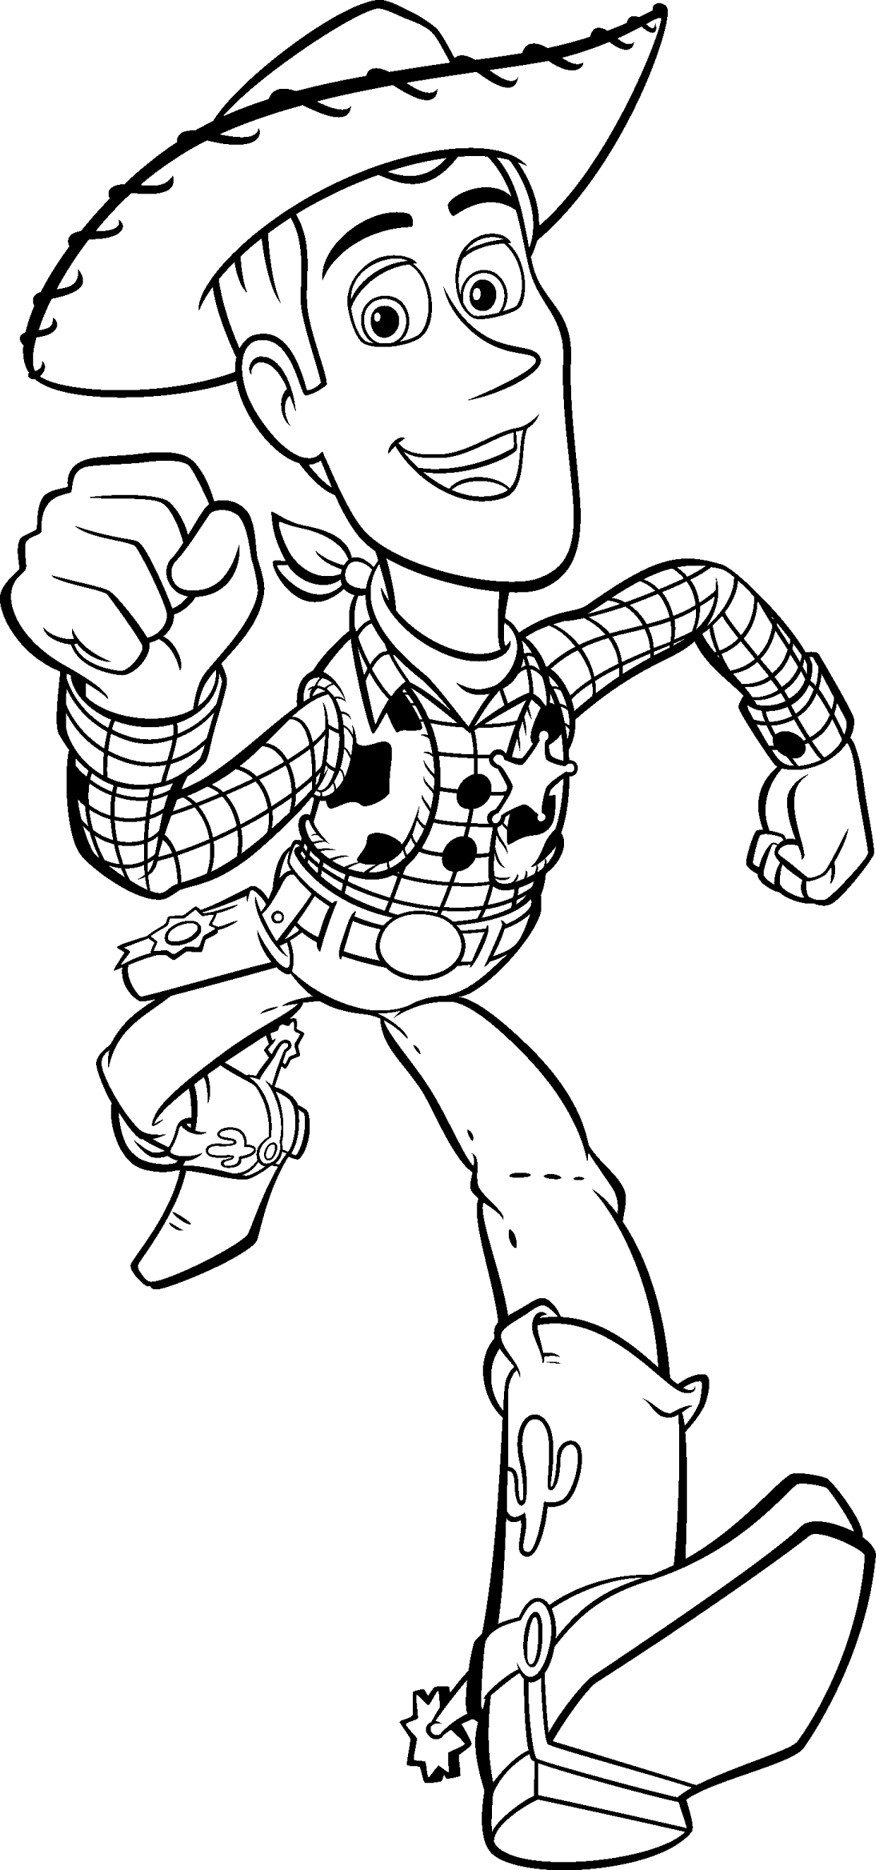 Disney Coloring Pages Free
 Free Printable Toy Story Coloring Pages For Kids